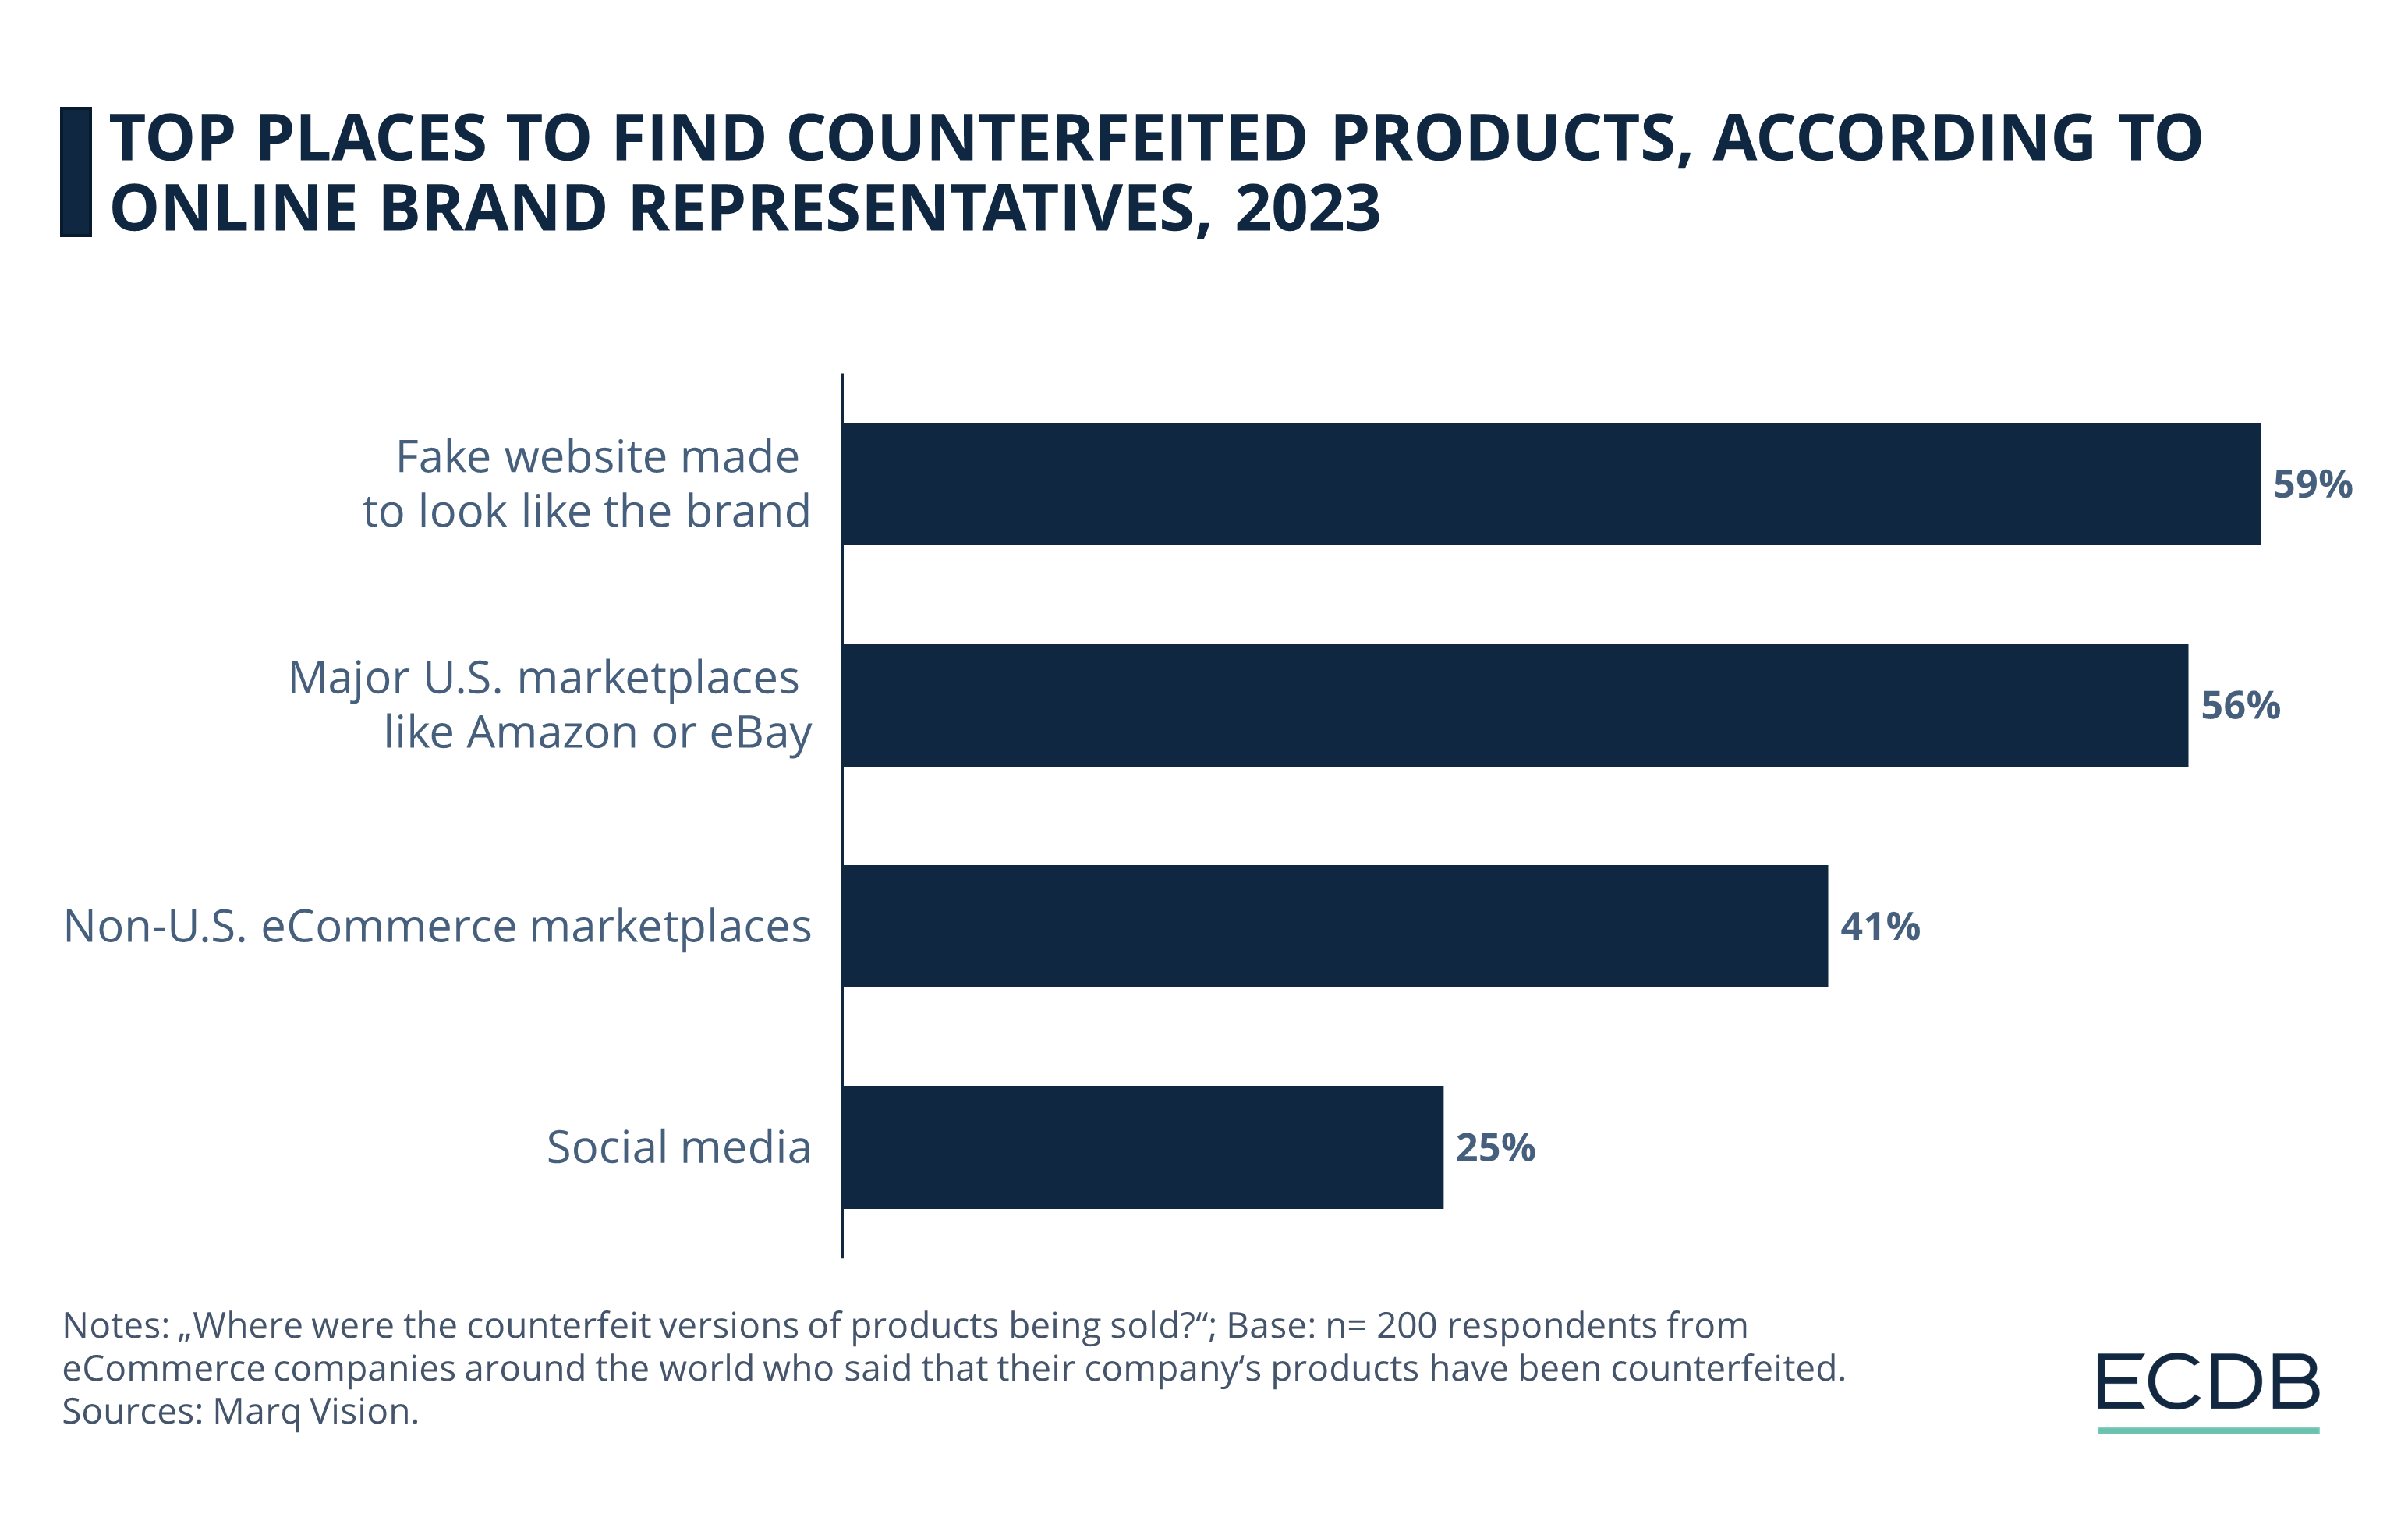 Top Places to Find Counterfeited Products, According to Online Brand Reps, 2023